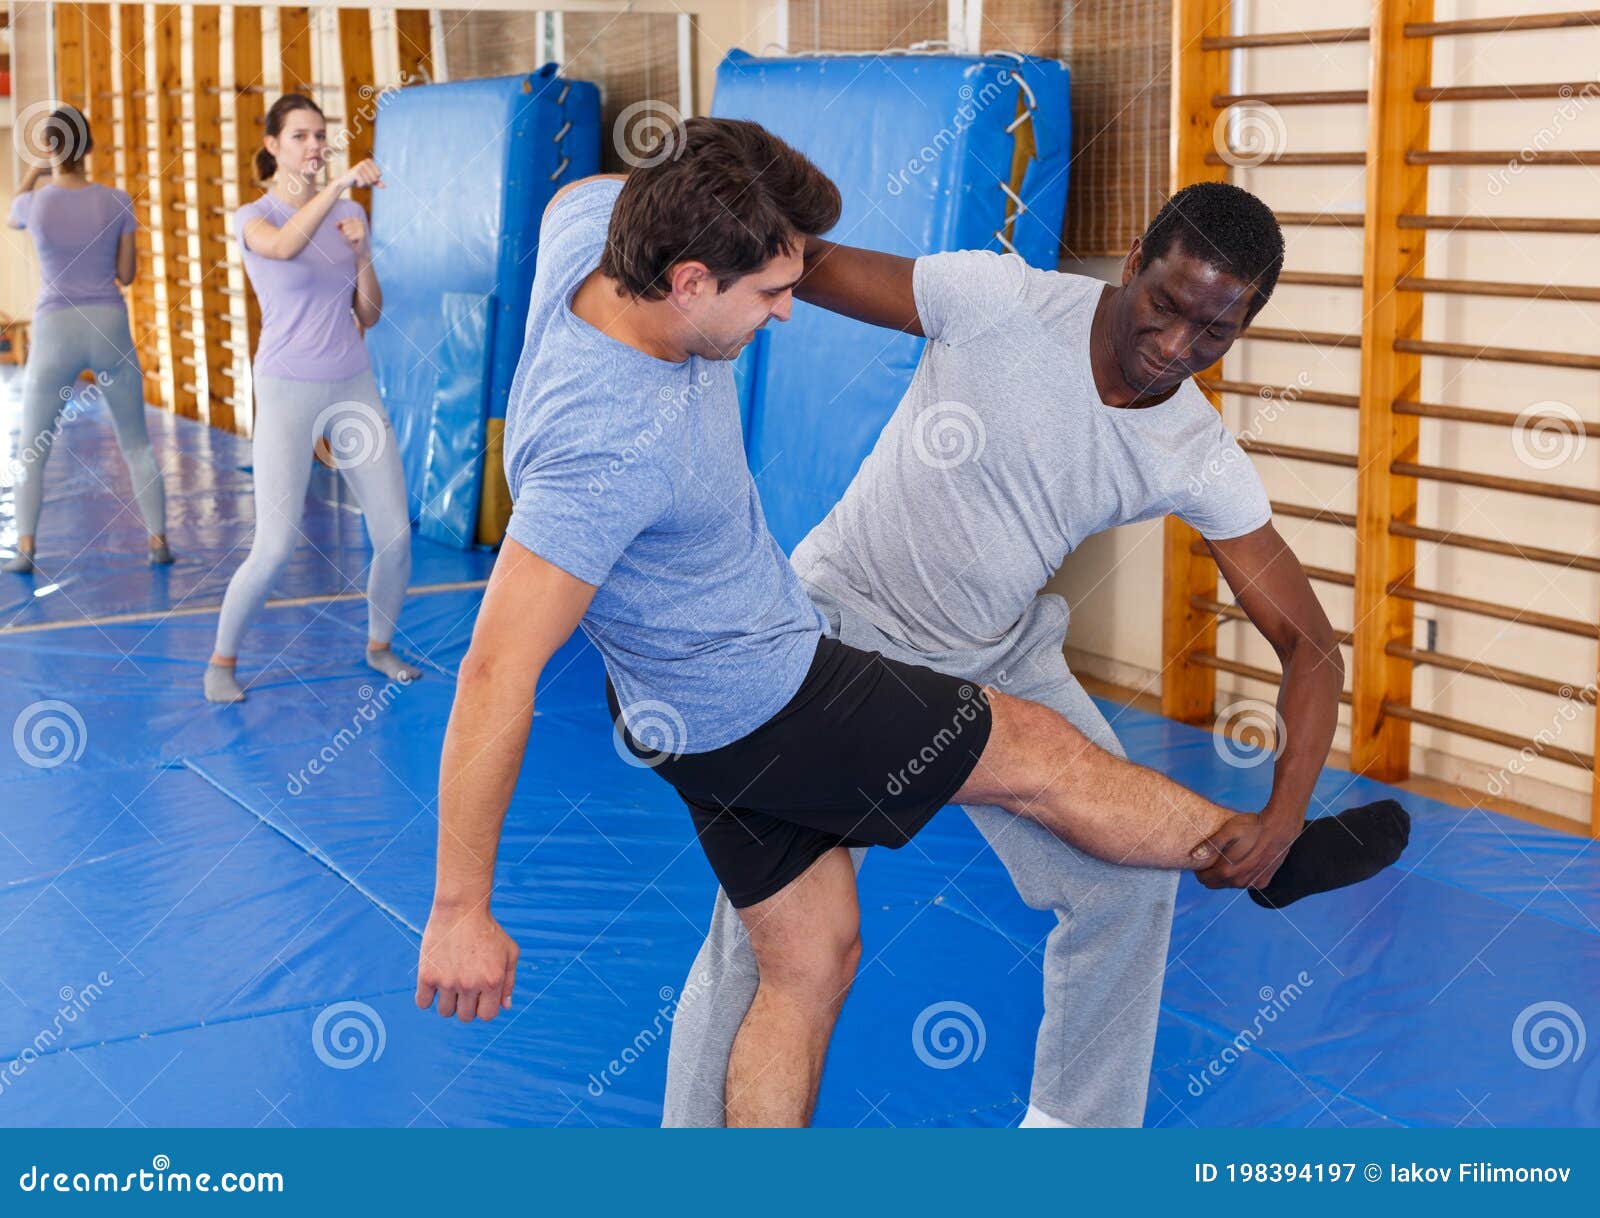 Two Men Practicing Self Defense Techniques Stock Image Image Of African American